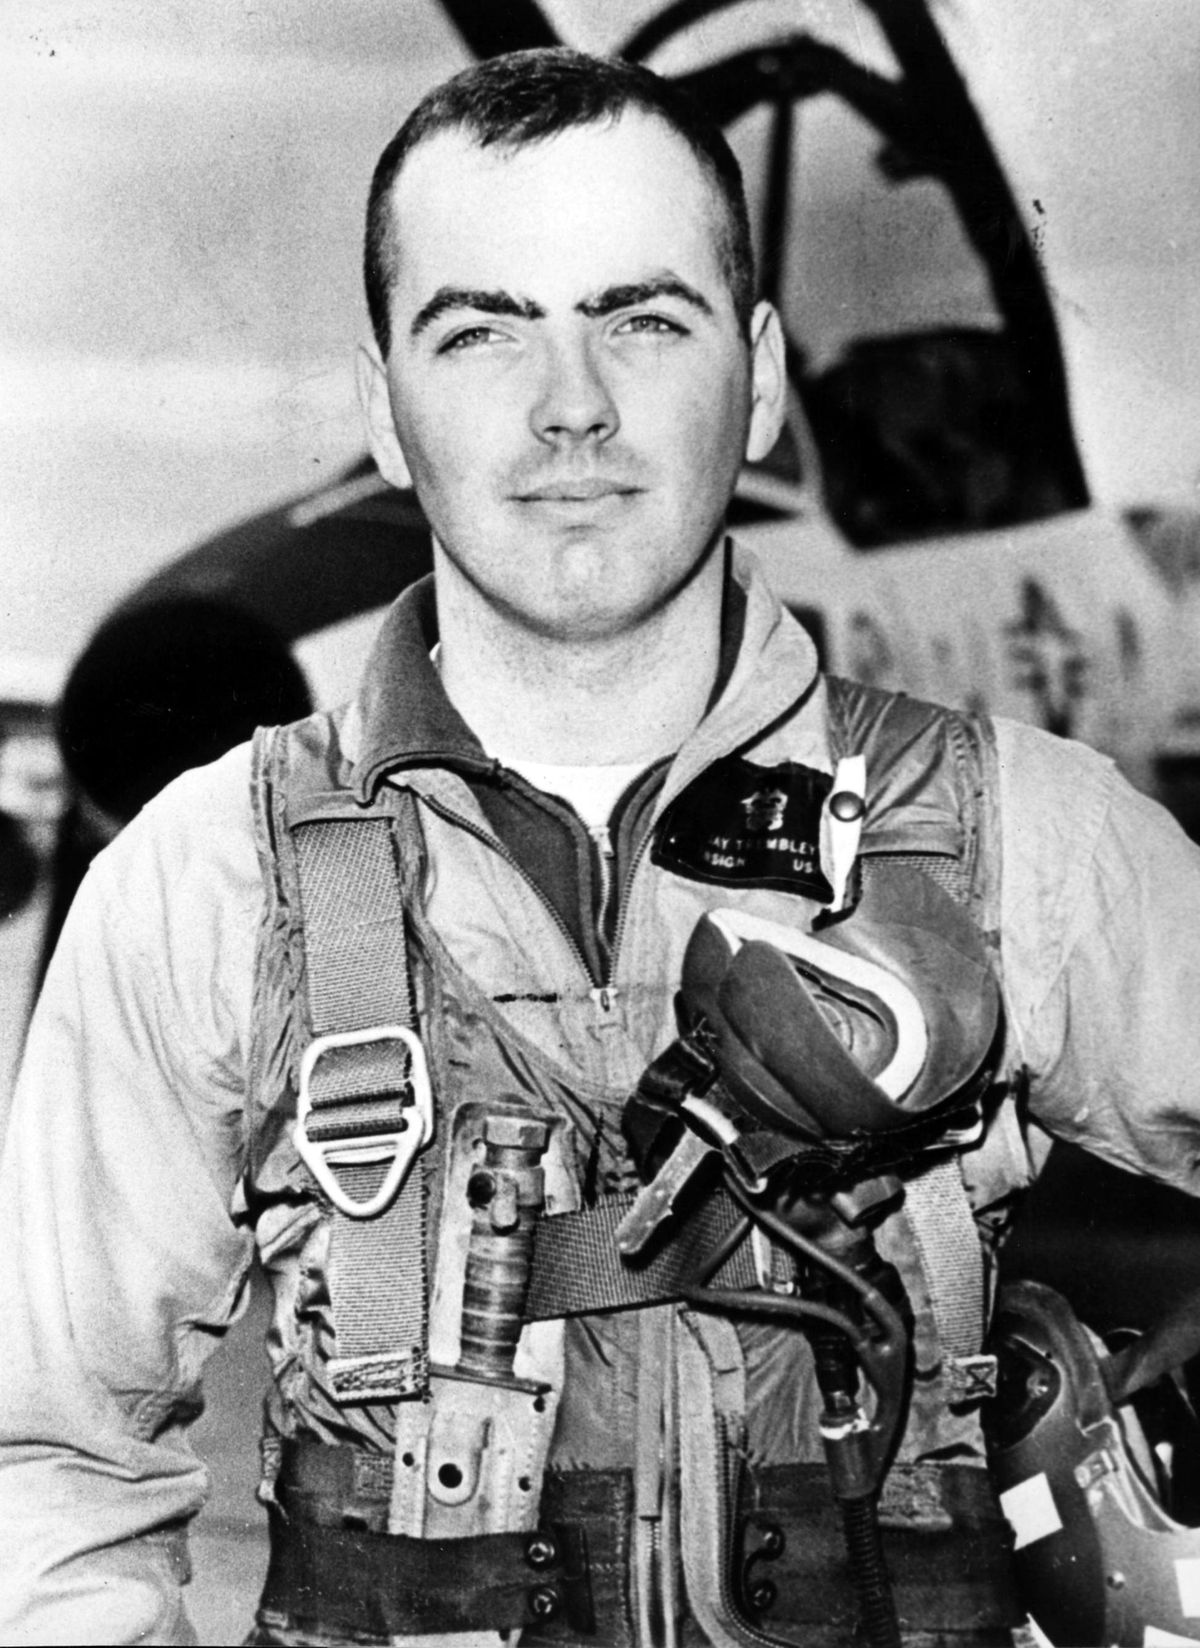 J. Forrest George Trembley’s remains were positively identified in the summer of 2004. Trembley was shot down over China during the Vietnam War on Aug. 21, 1967. Funeral and memorial services were in March 2005 as the remains have been returned to his family. (PHOTO ARCHIVE / SR)